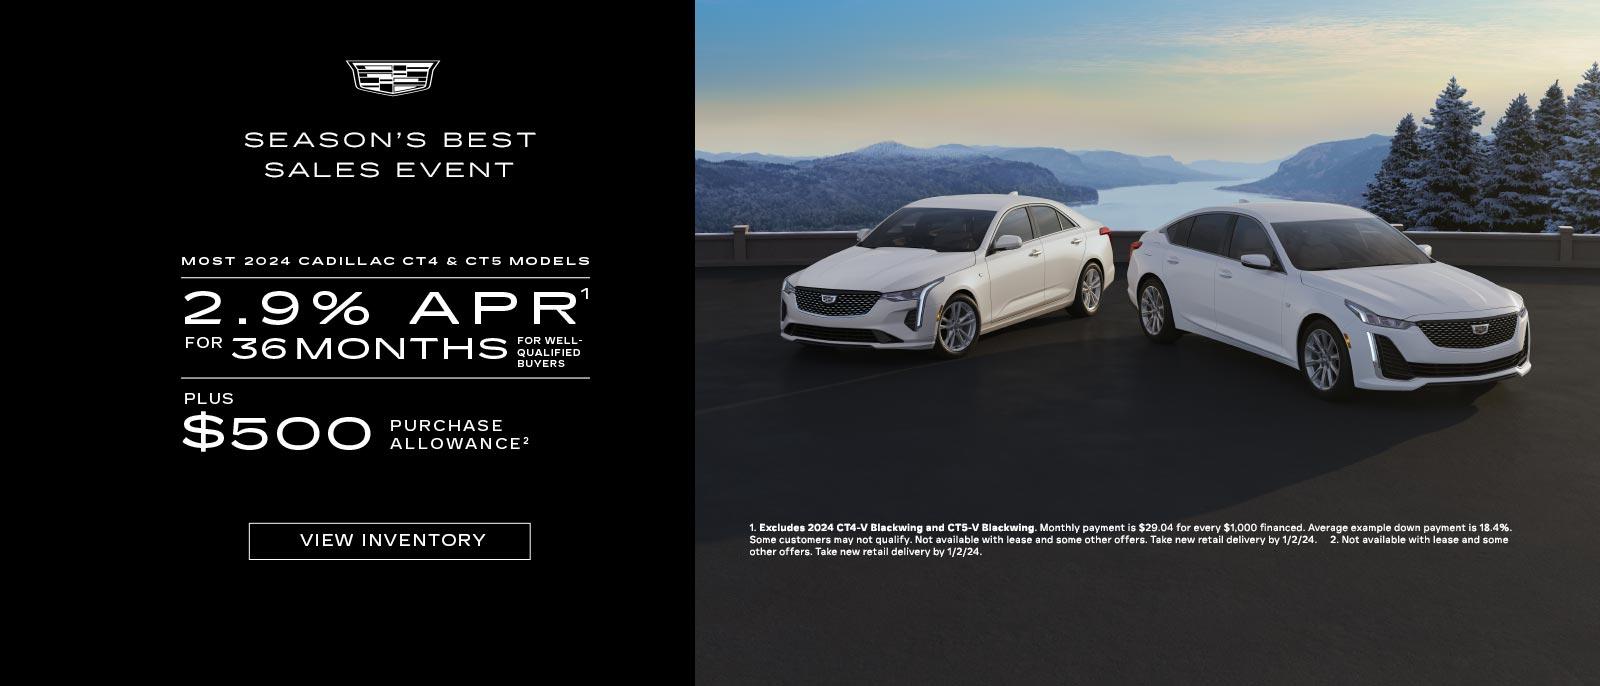 Most 2024 Cadillac CT4 and CT5 models. 2.9% APR for 36 months for well qualified buyers. Plus $500 Purchase Allowance.